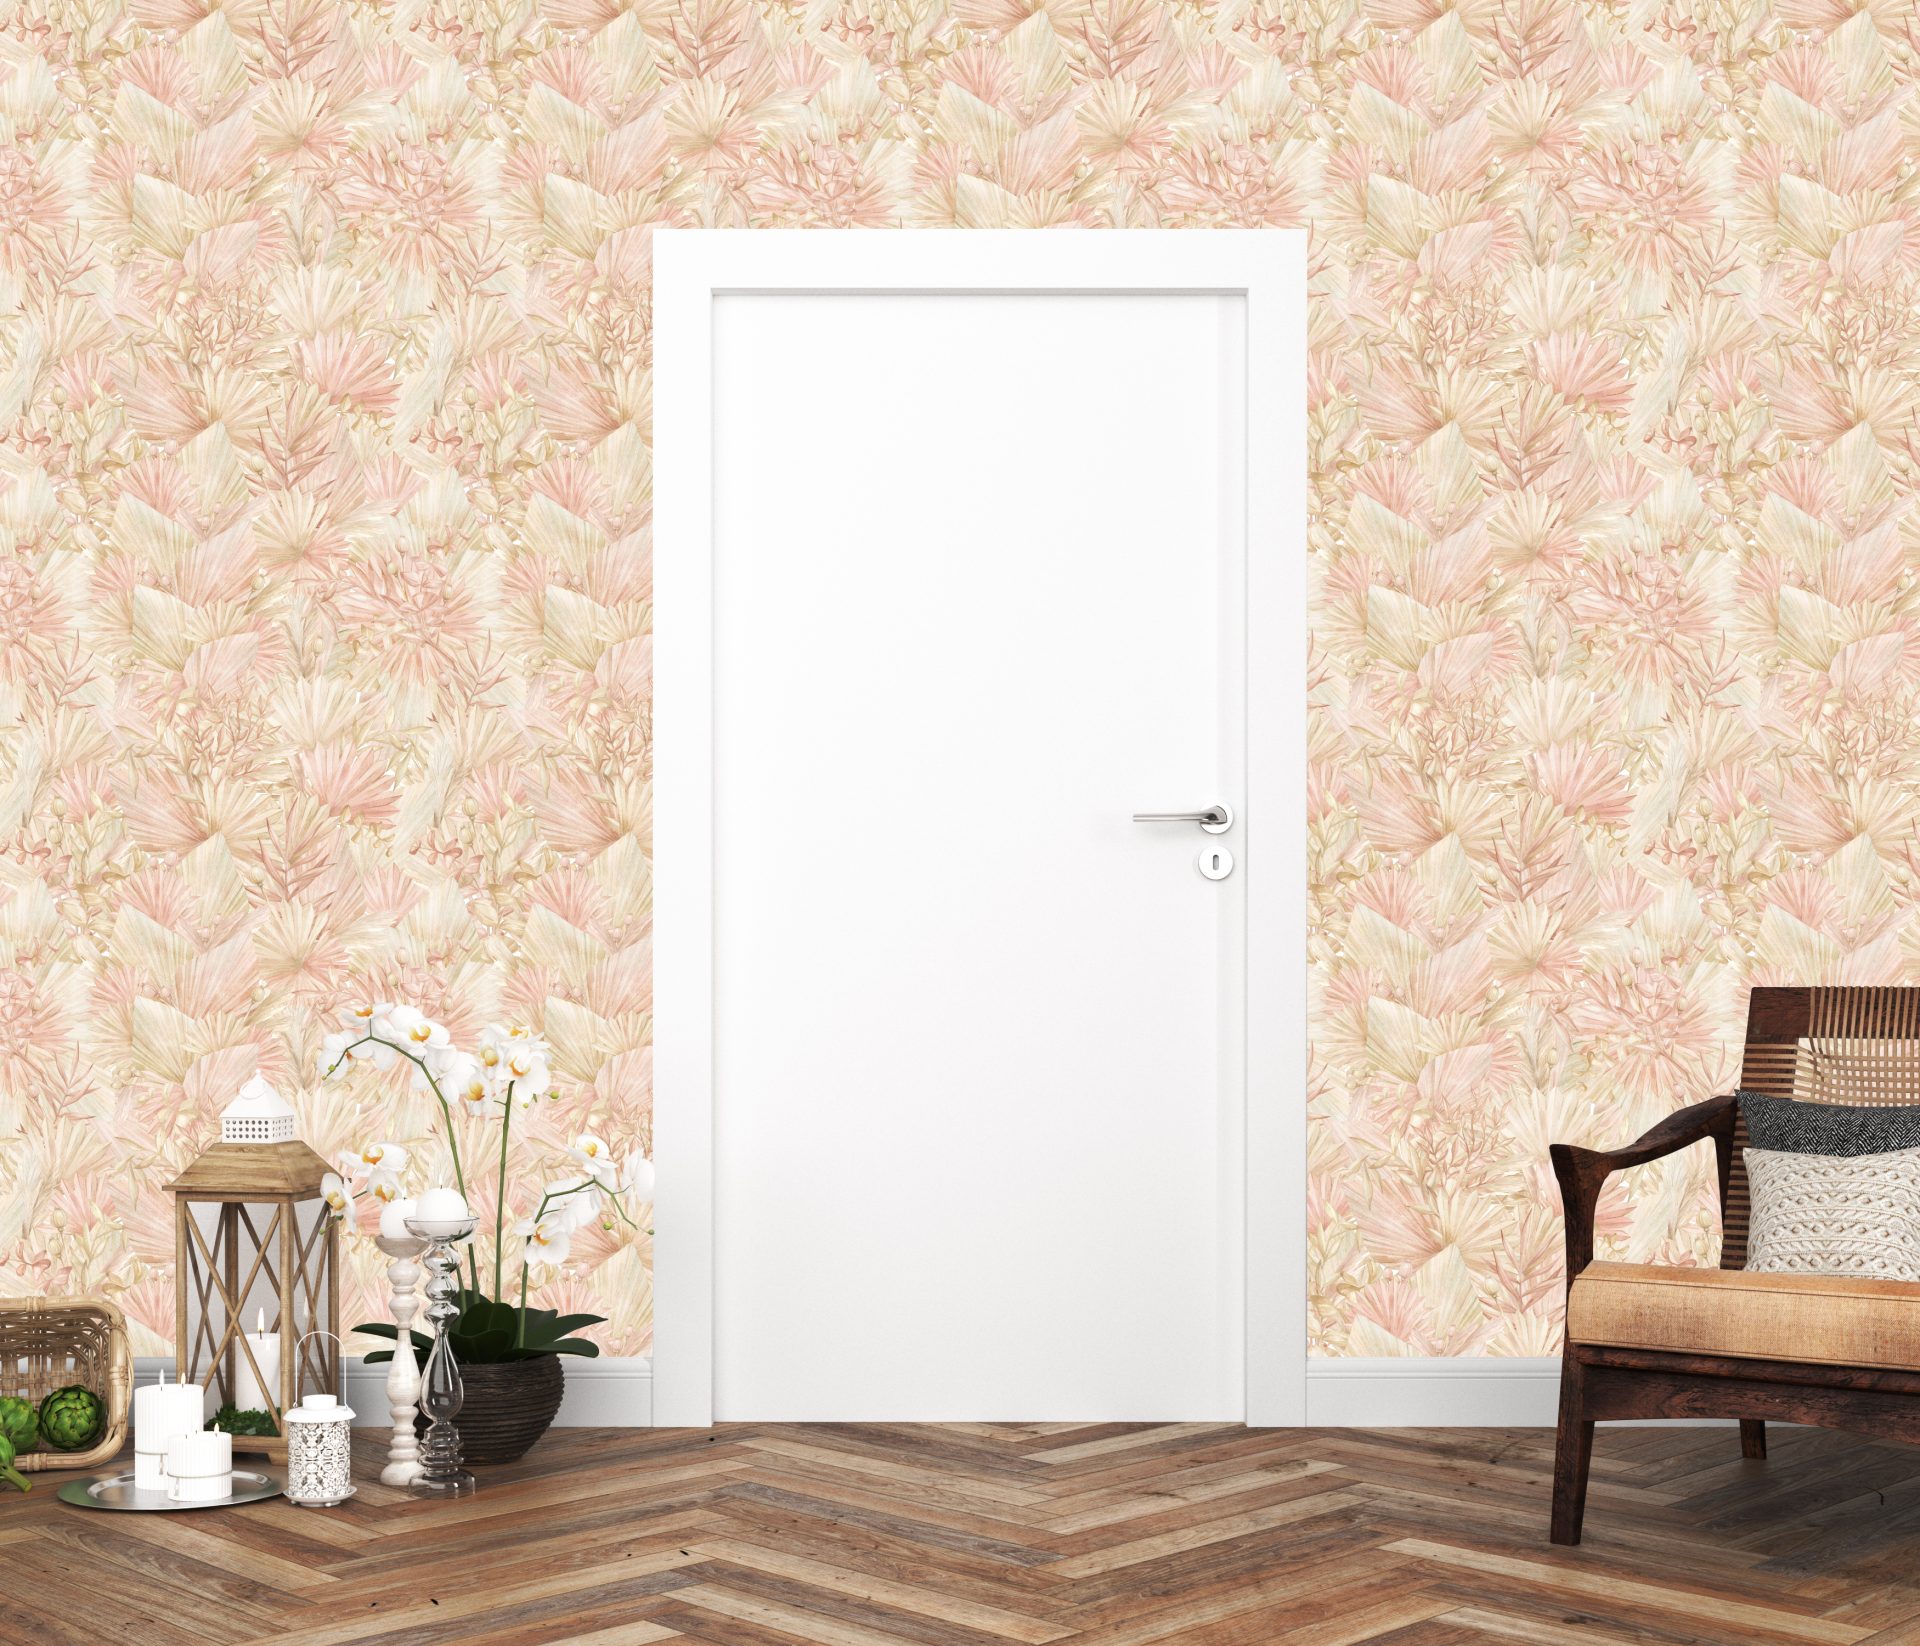 Benefits of Using Peel and Stick Wallpaper